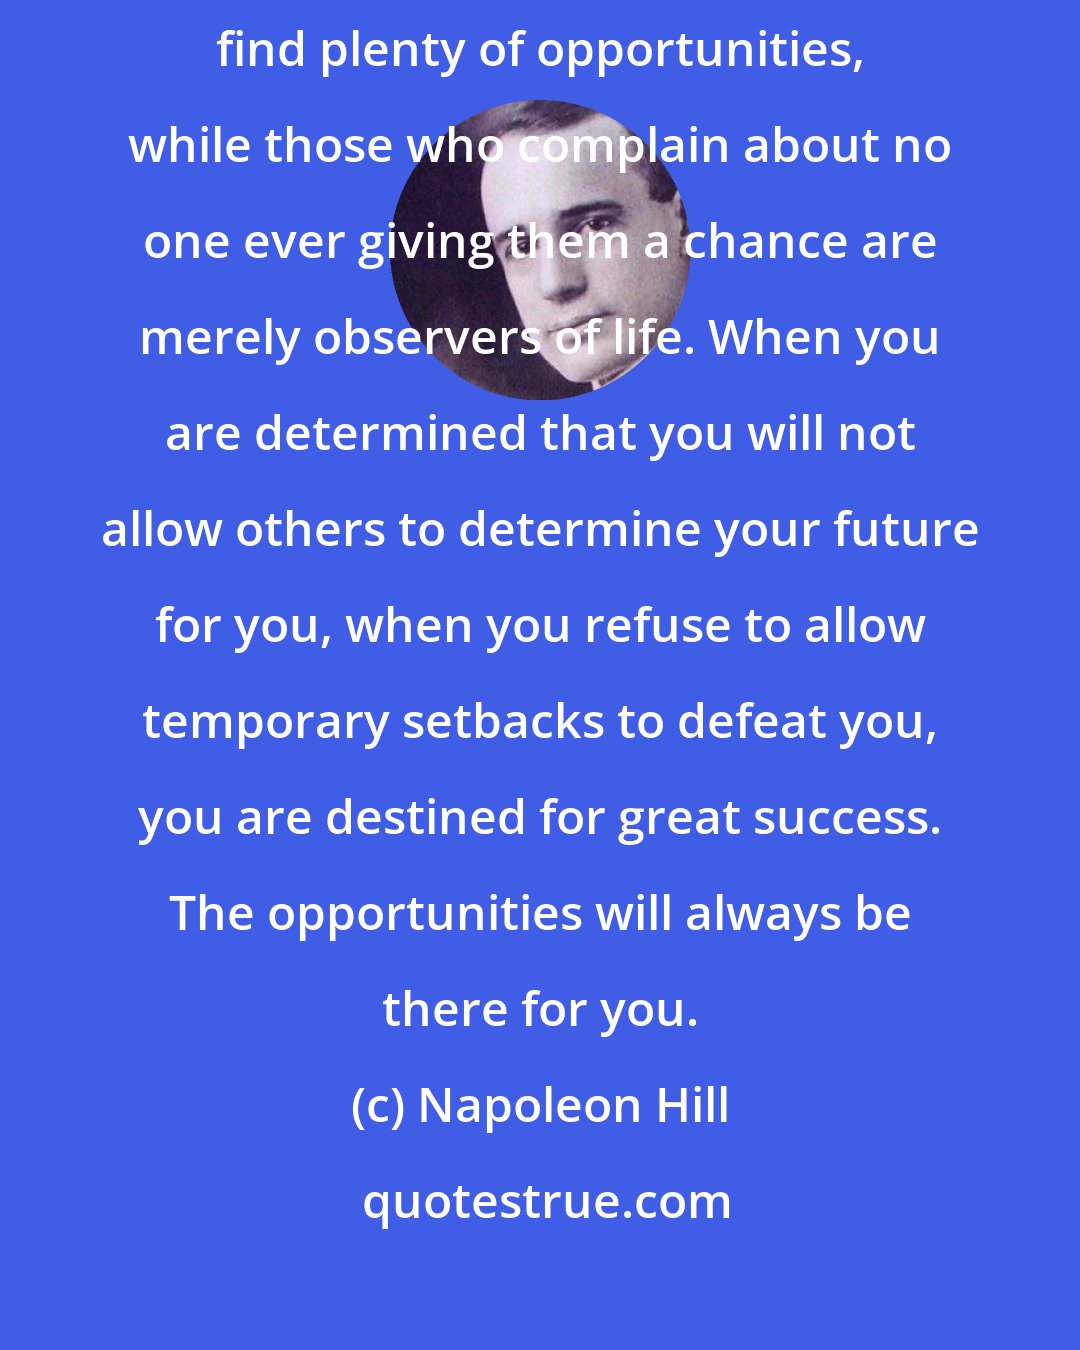 Napoleon Hill: Those who approach their jobs and careers with enthusiasm always find plenty of opportunities, while those who complain about no one ever giving them a chance are merely observers of life. When you are determined that you will not allow others to determine your future for you, when you refuse to allow temporary setbacks to defeat you, you are destined for great success. The opportunities will always be there for you.